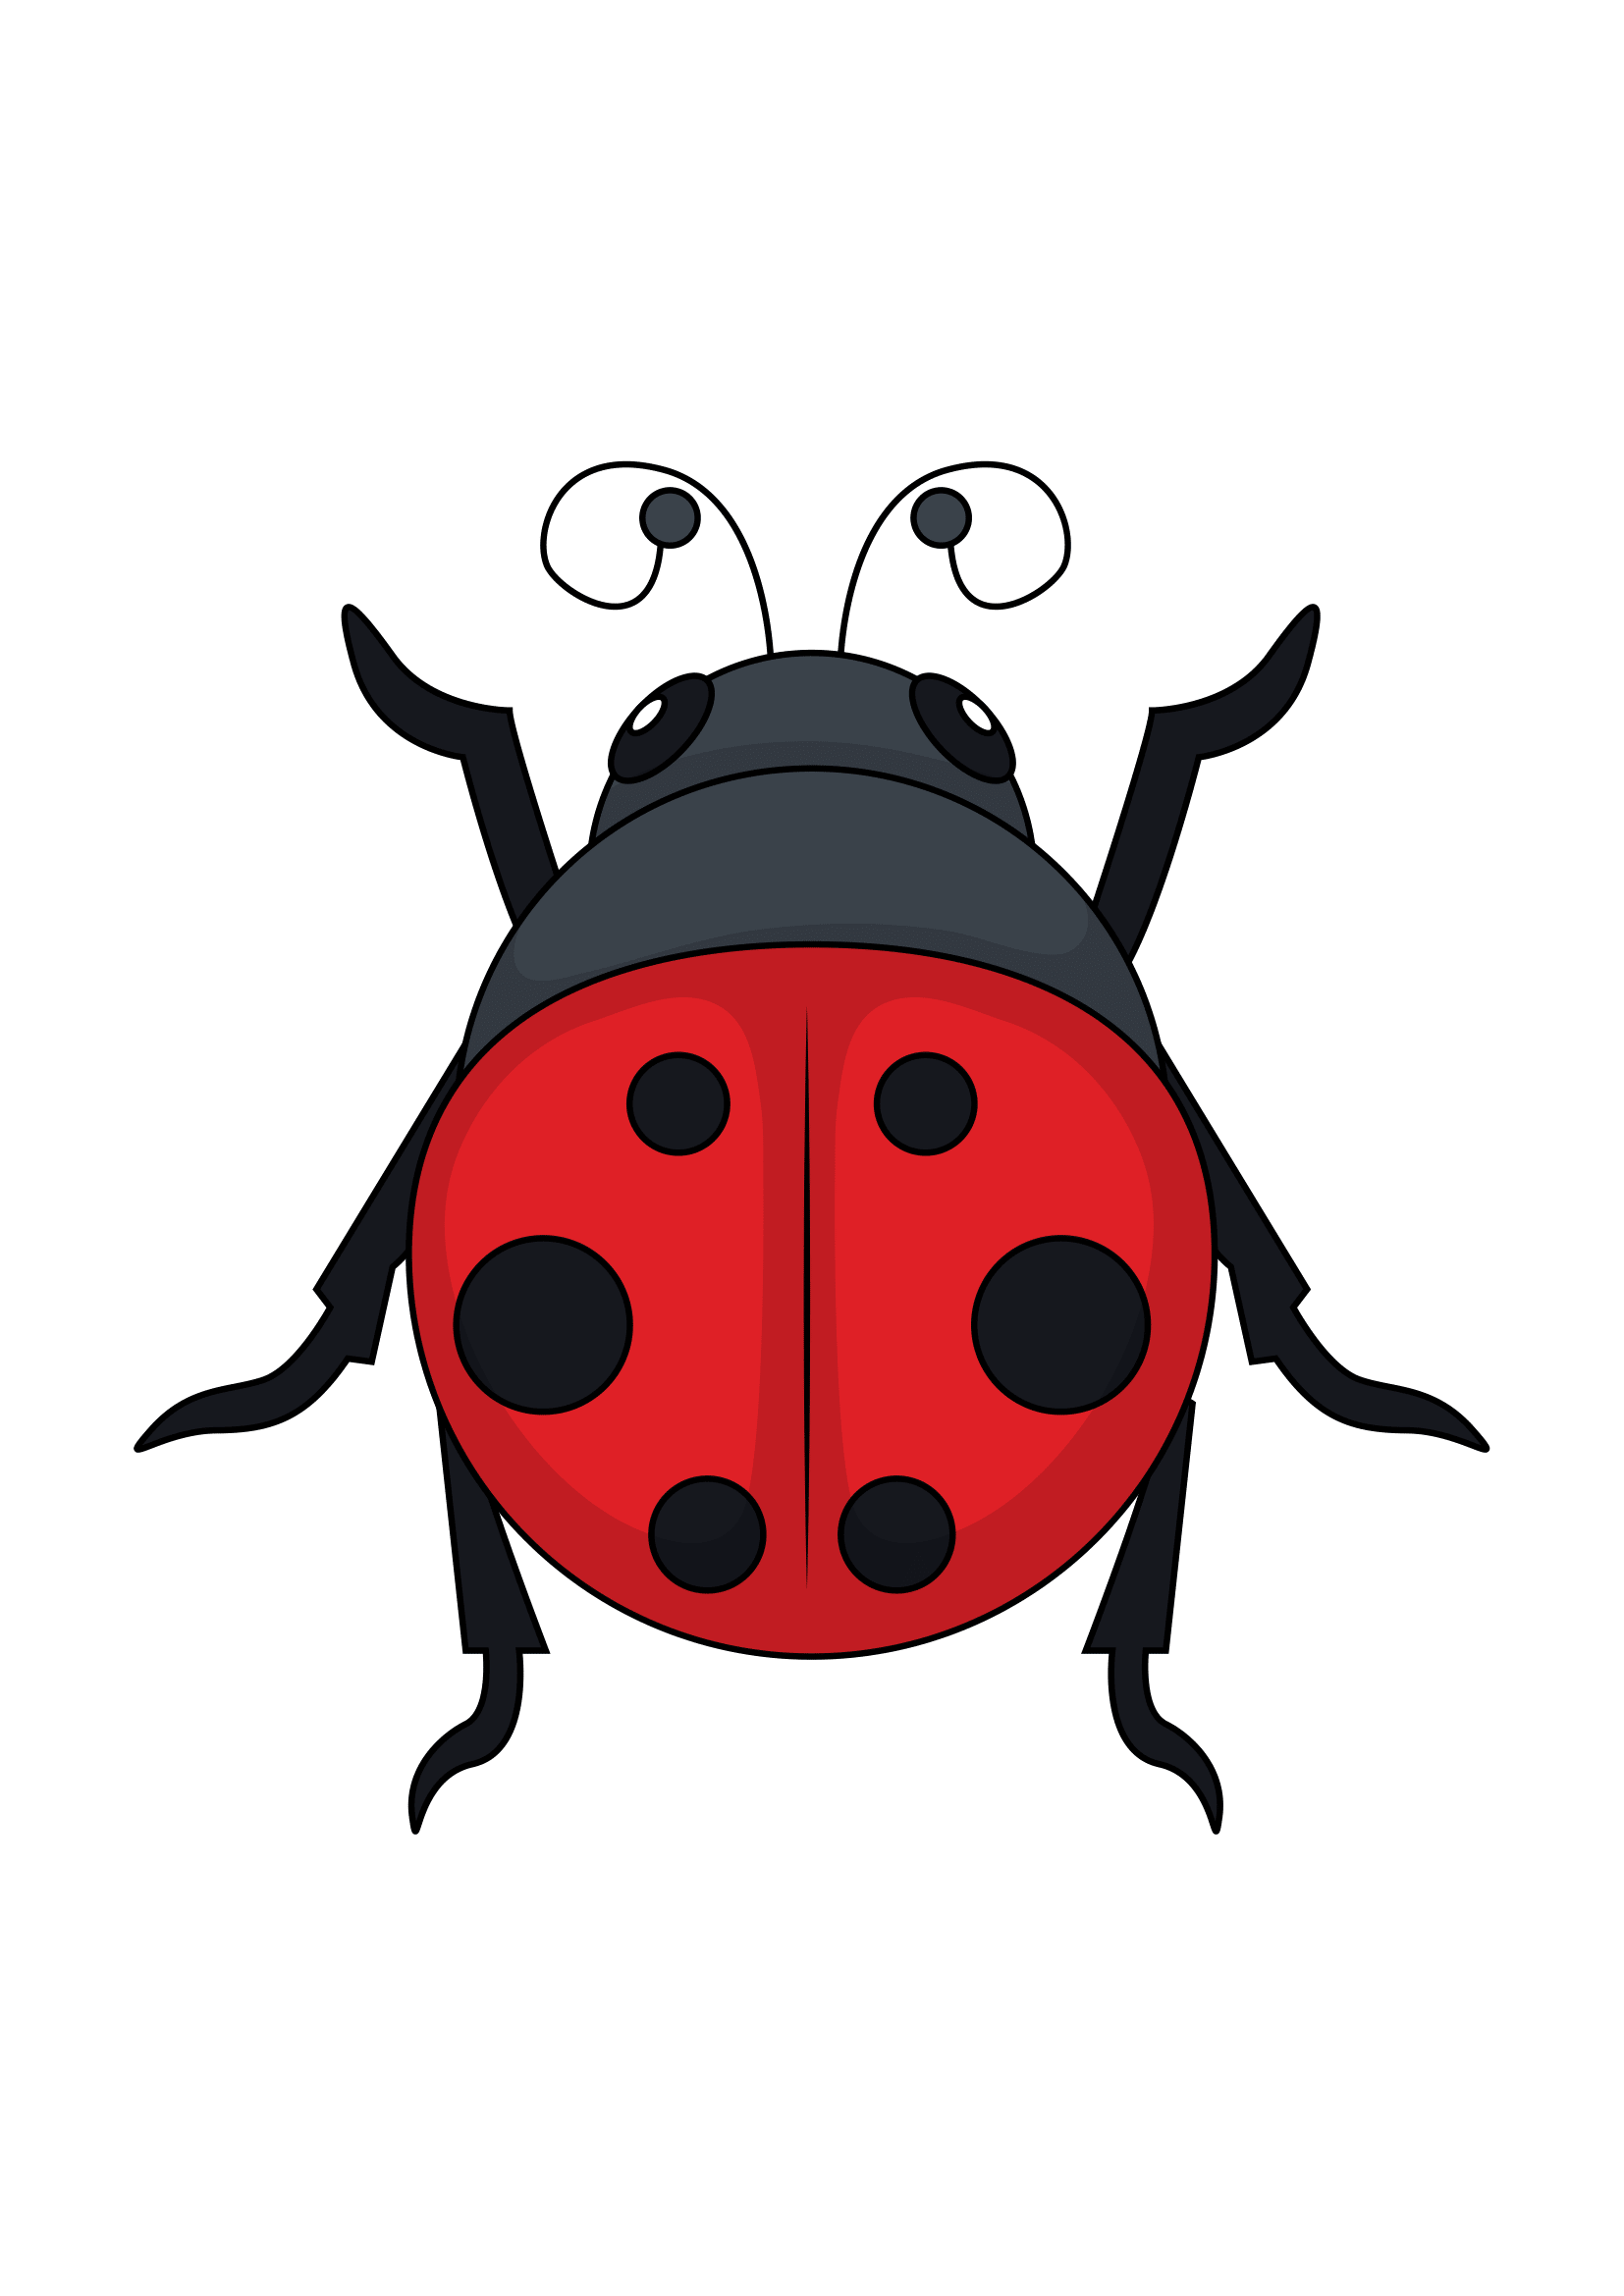 How to Draw A Ladybug Step by Step Printable